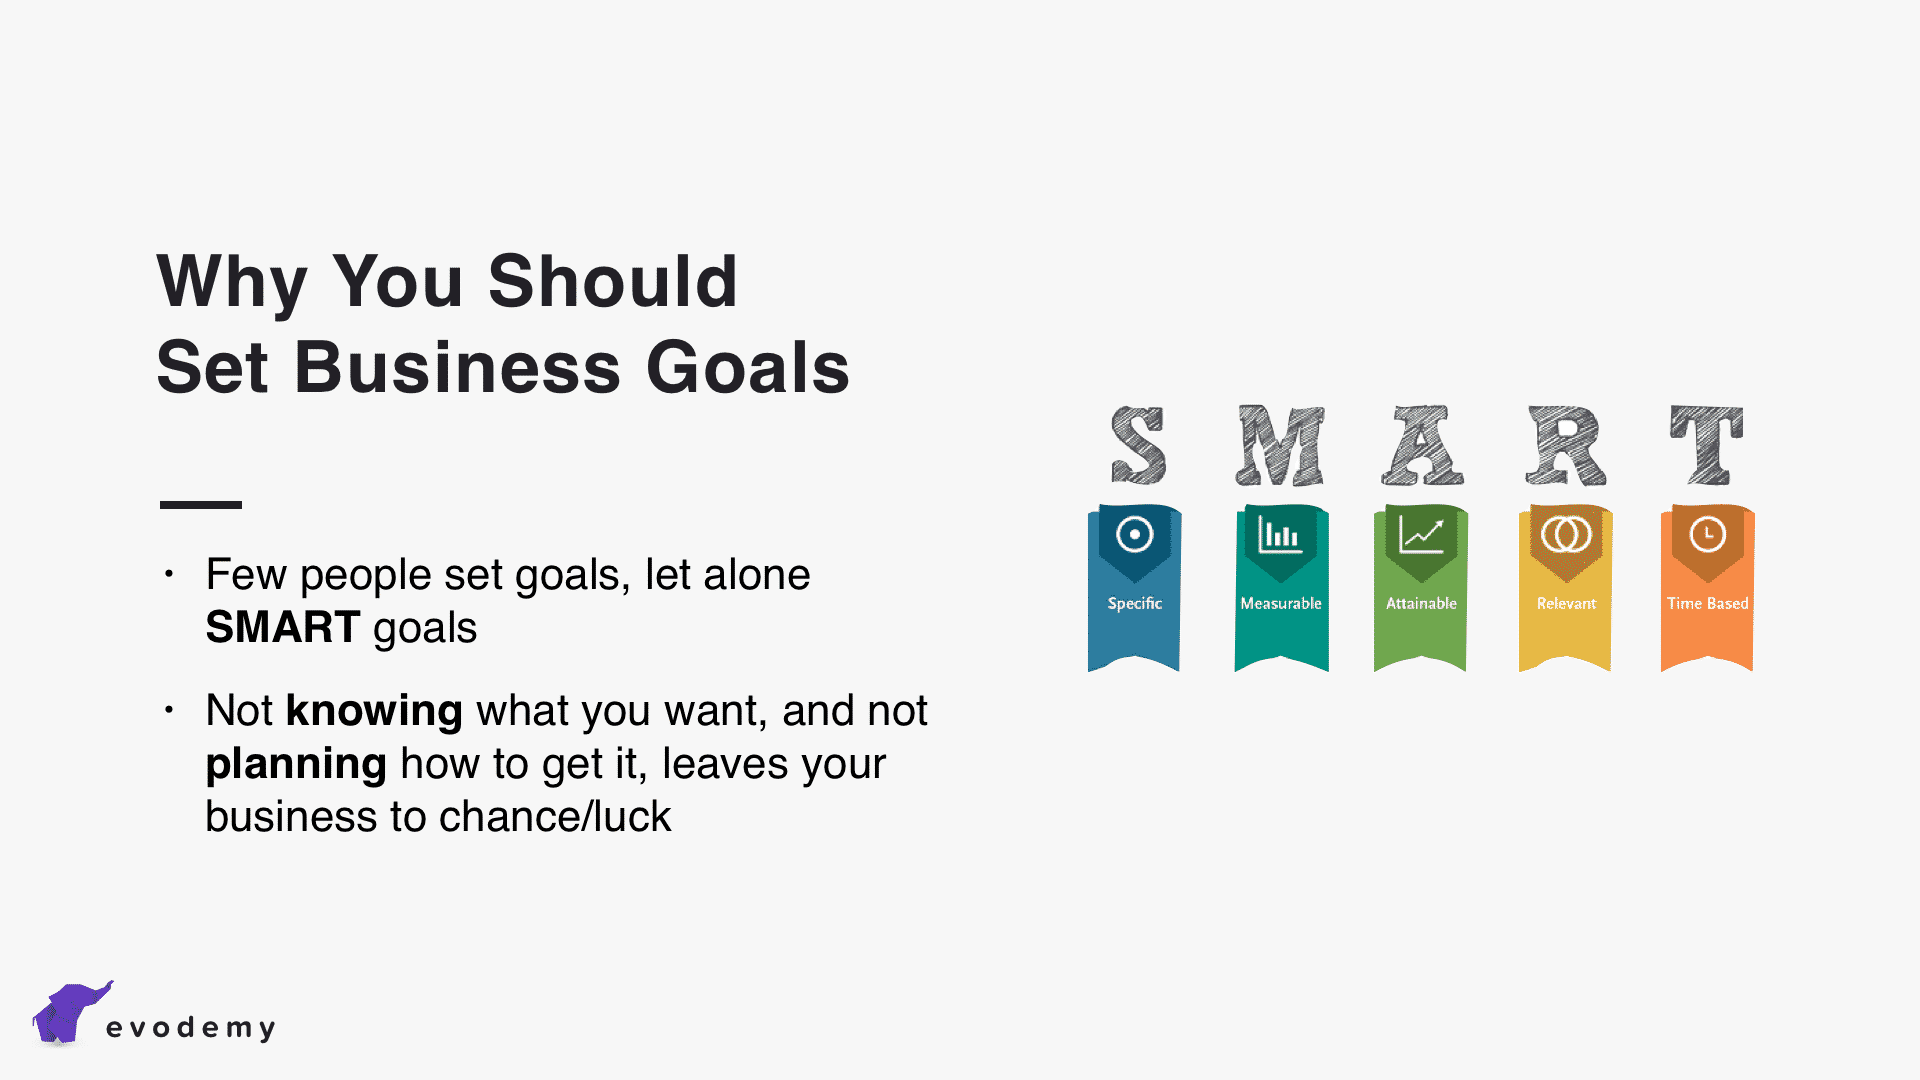 Why You Should Set Business Goals